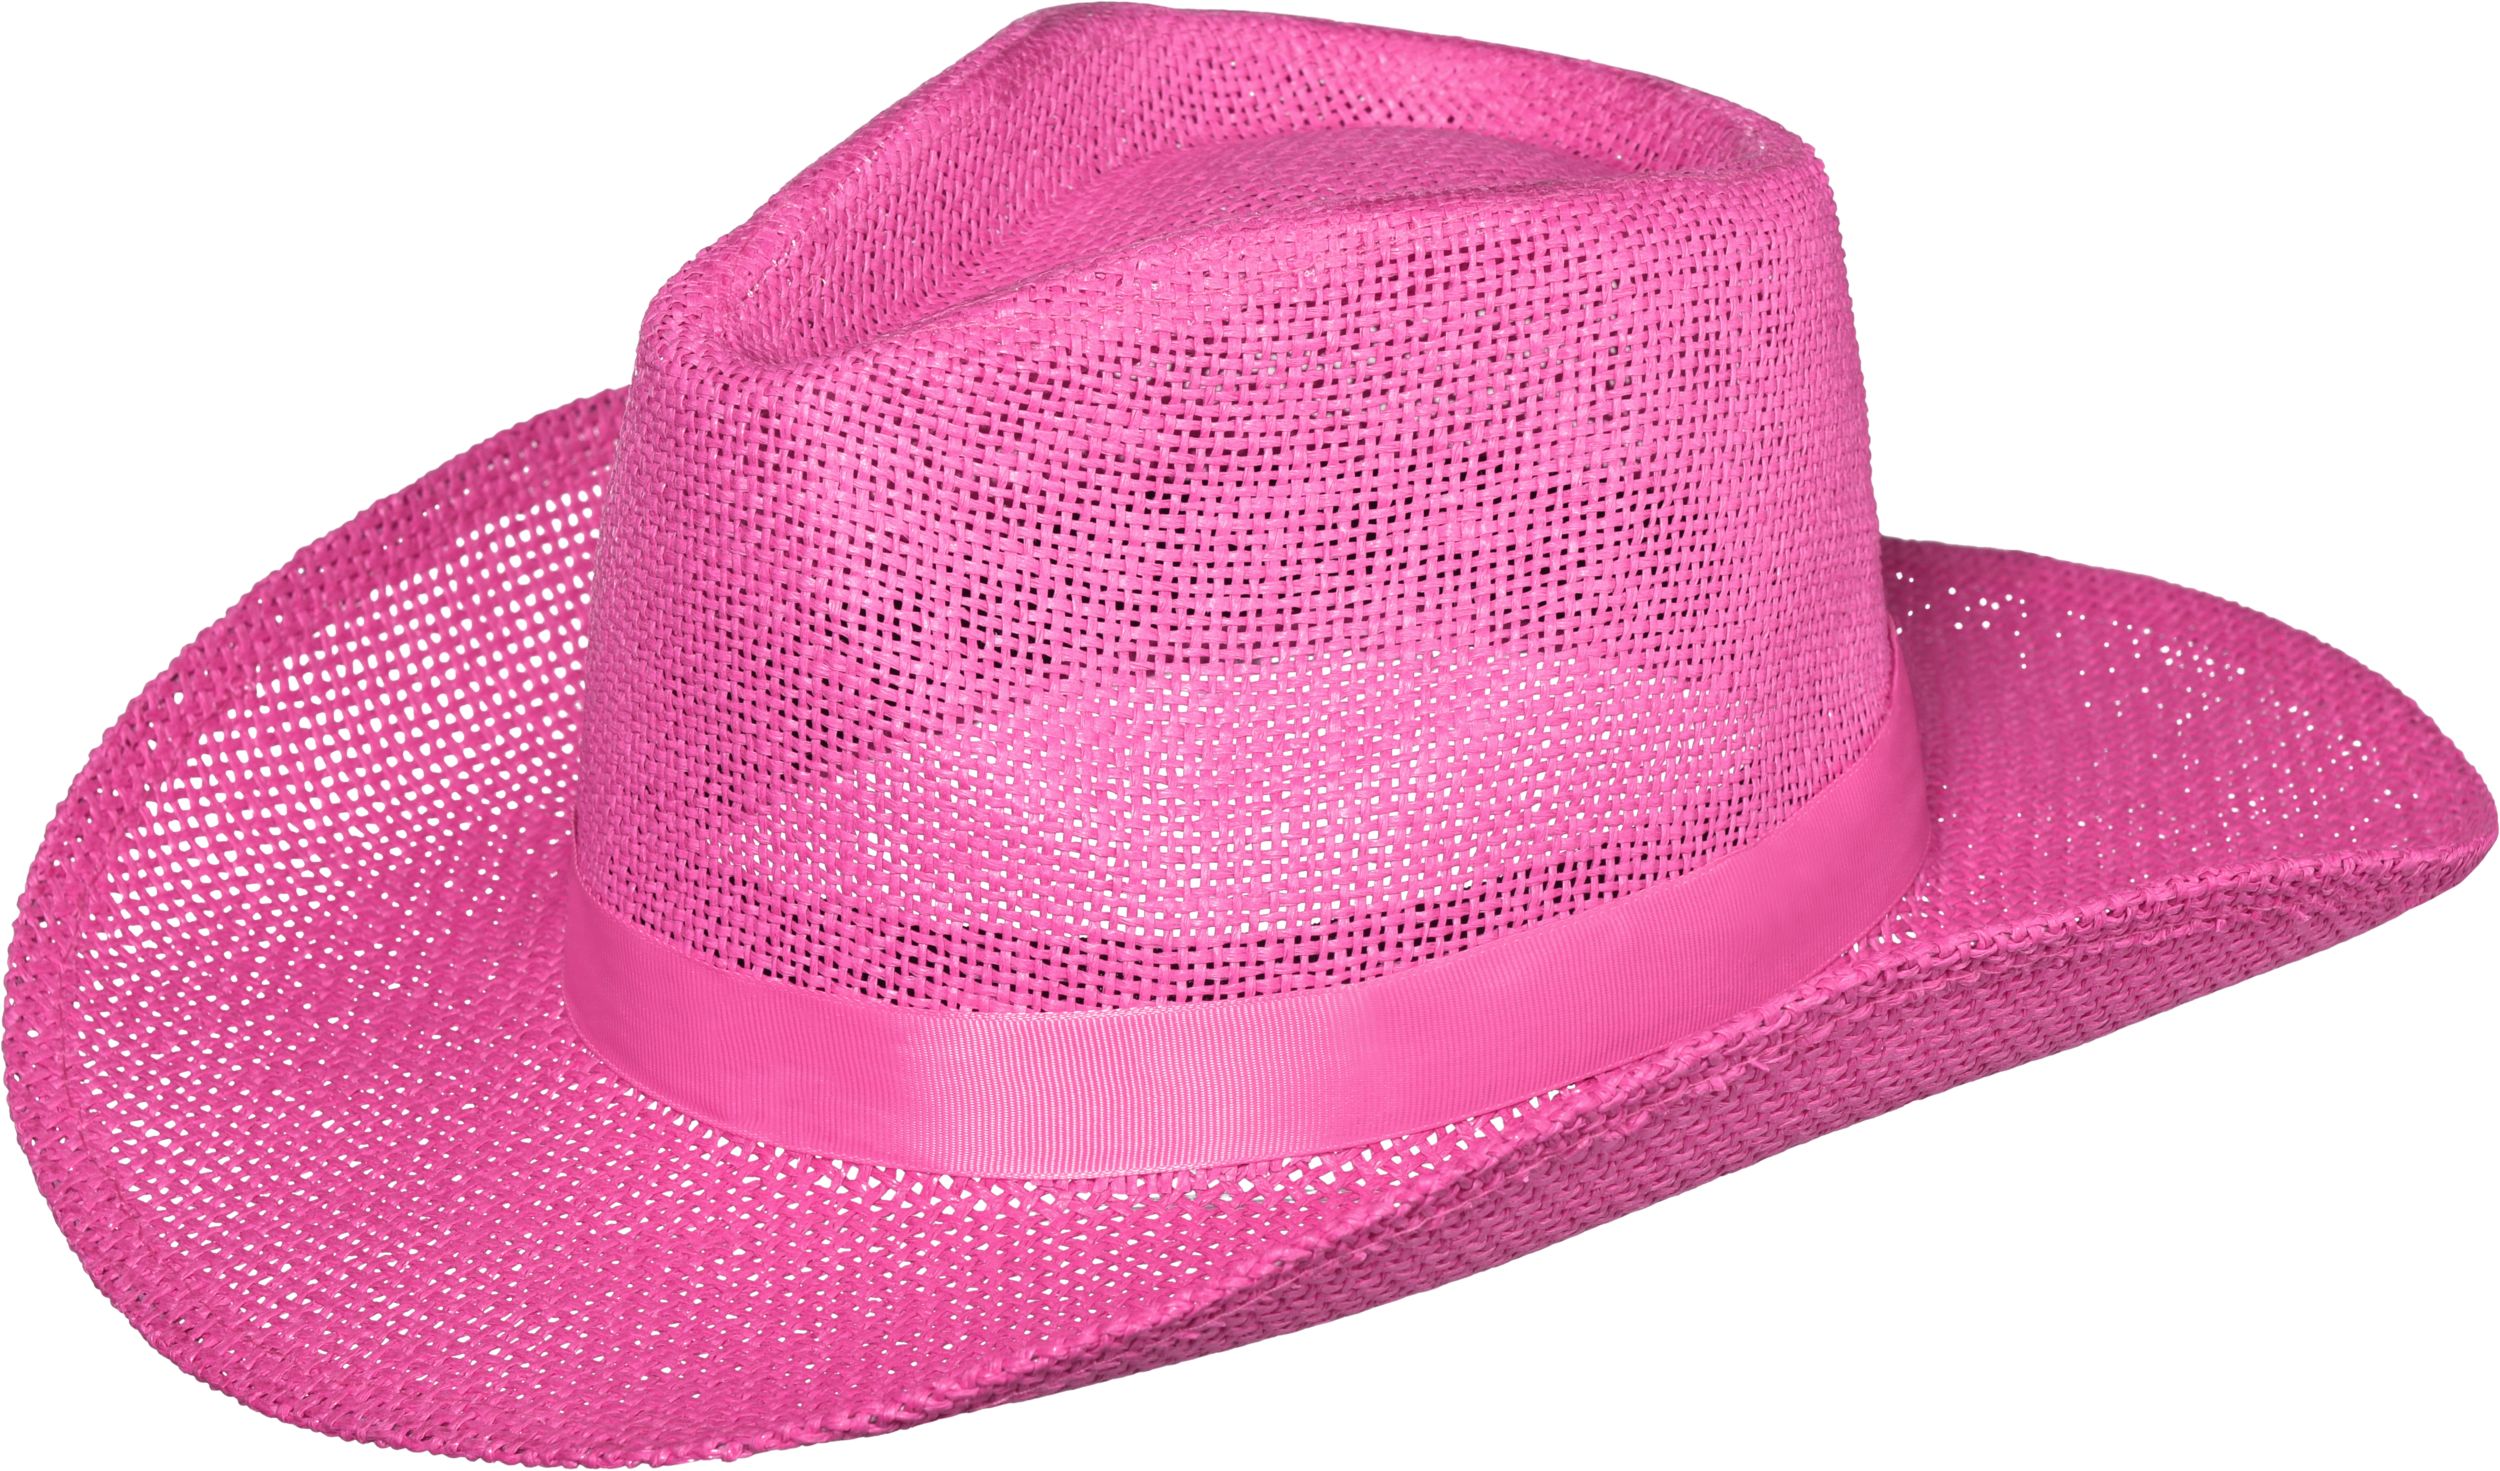 Western Mesh Cowboy Hat, Assorted Colours, One Size, Wearable